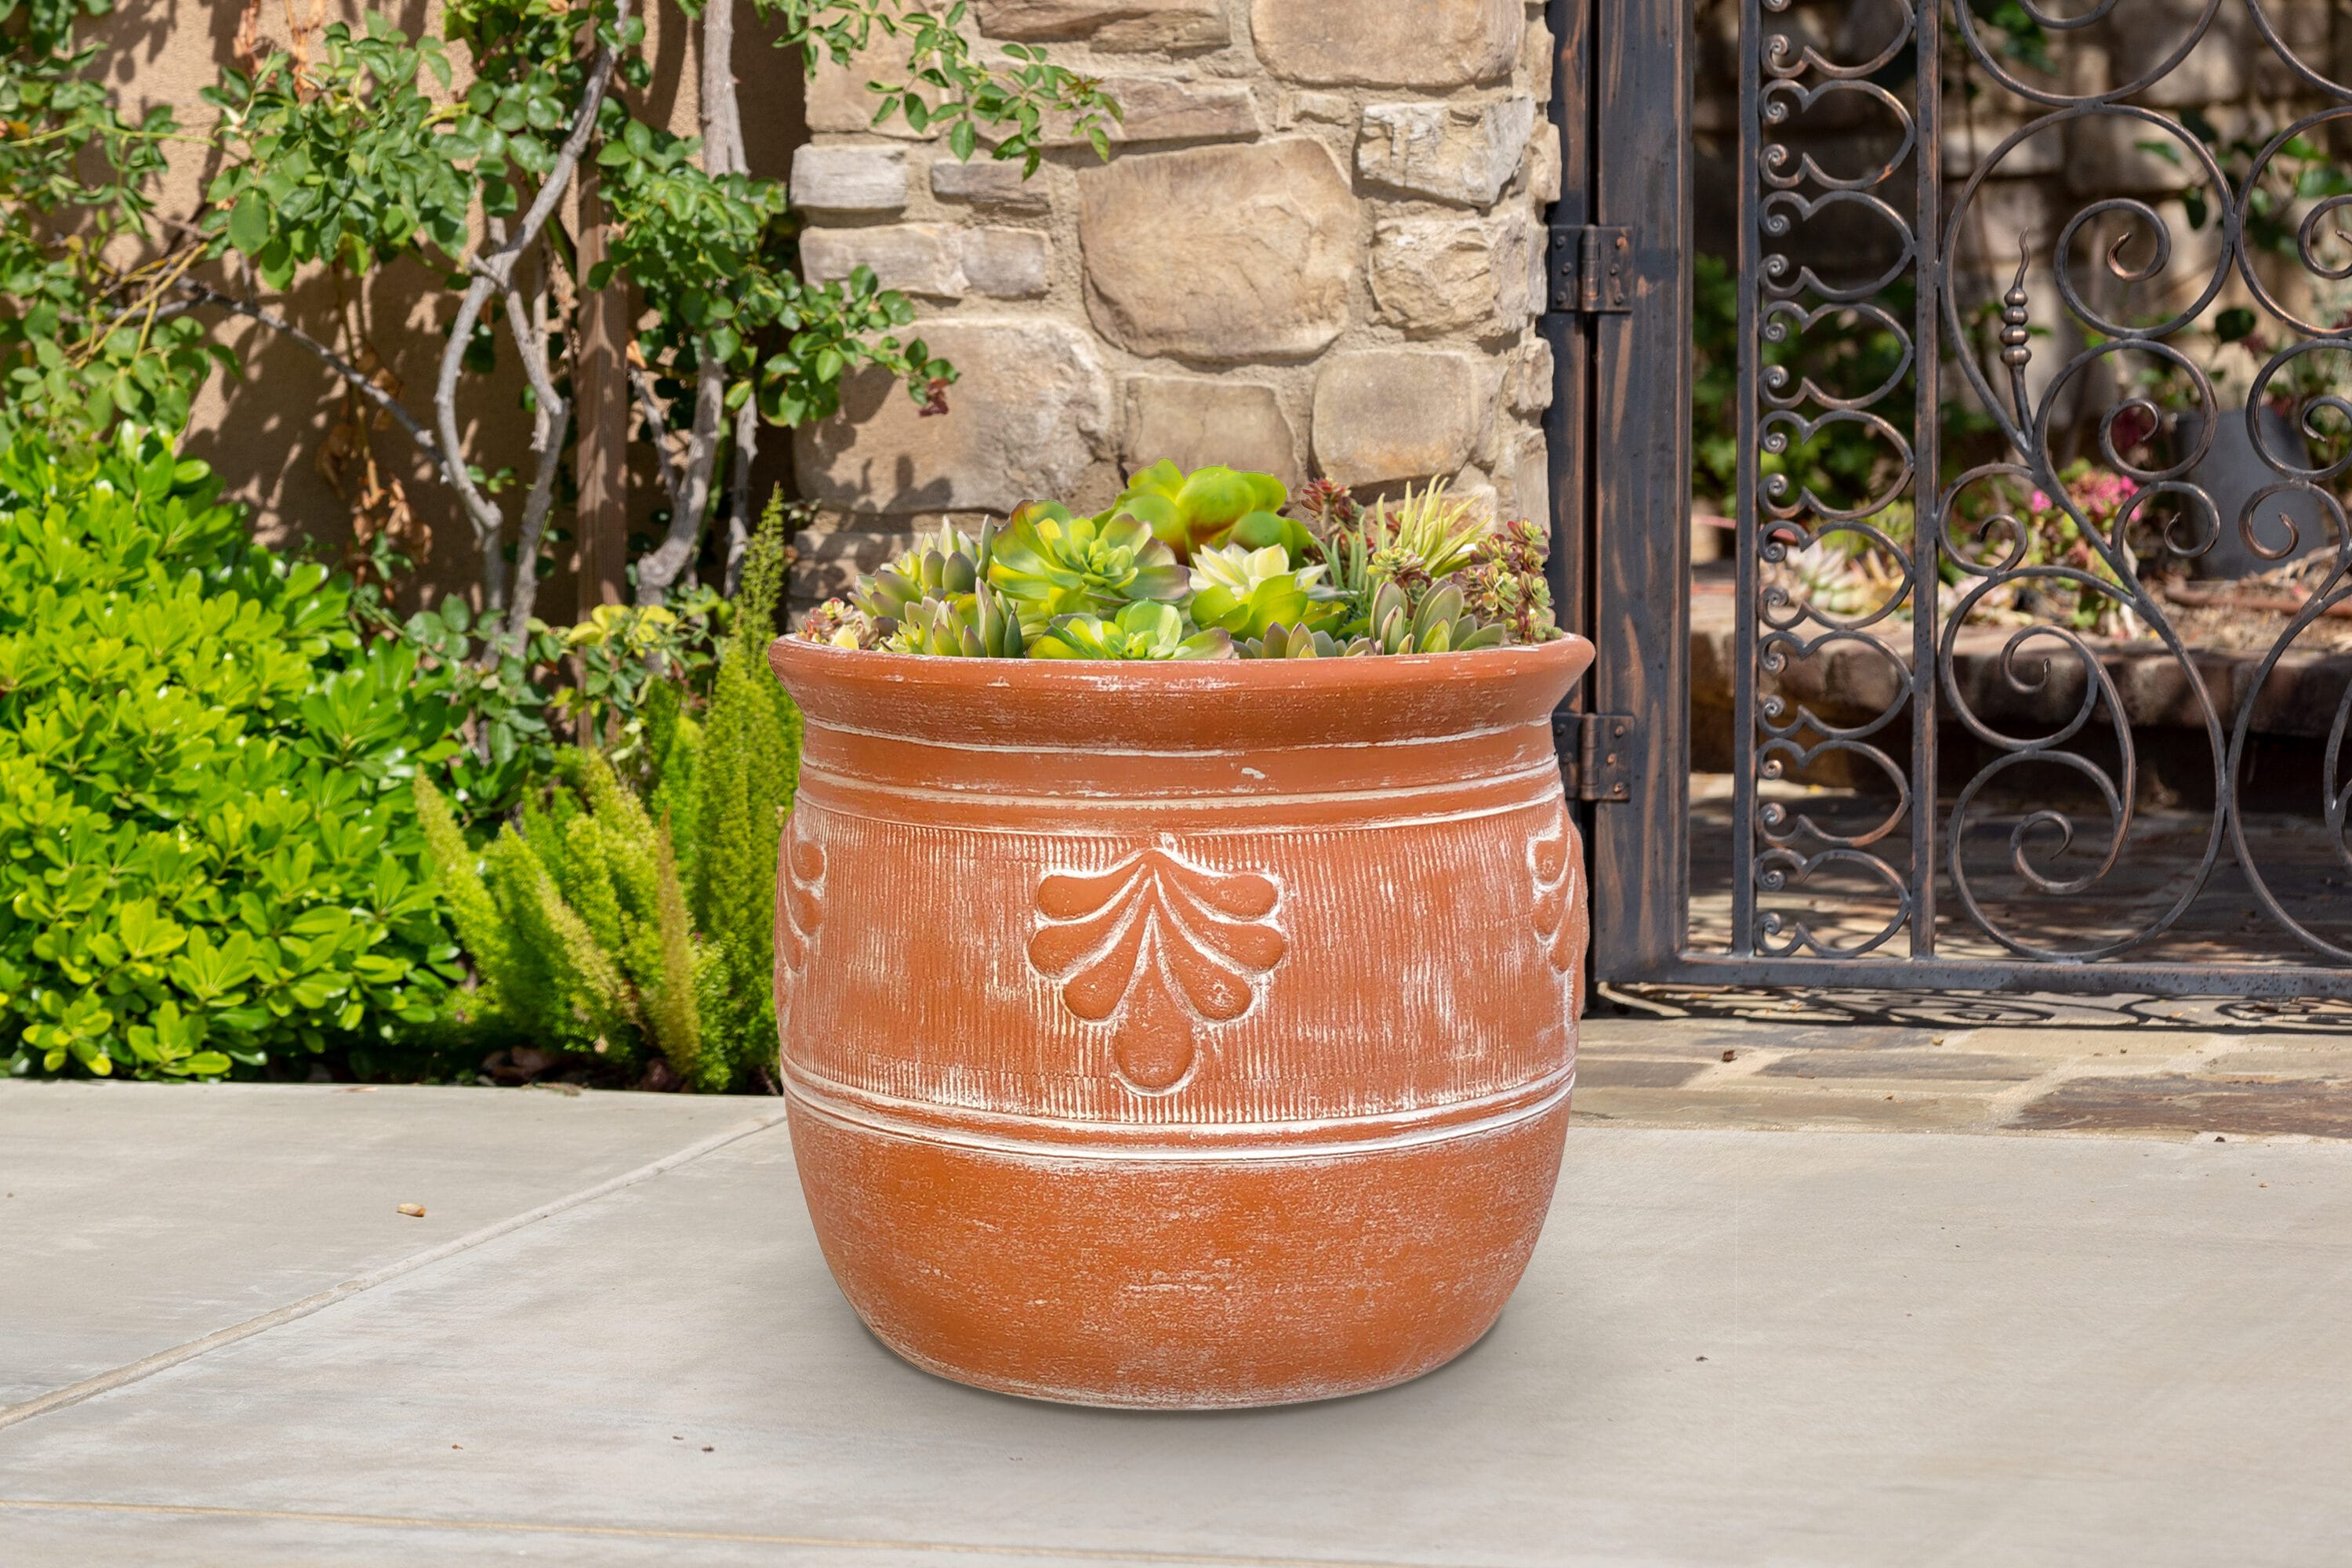 Pennington 18-in W x 16.5-in H Terrcotta Clay Traditional Outdoor Planter  in the Pots & Planters department at